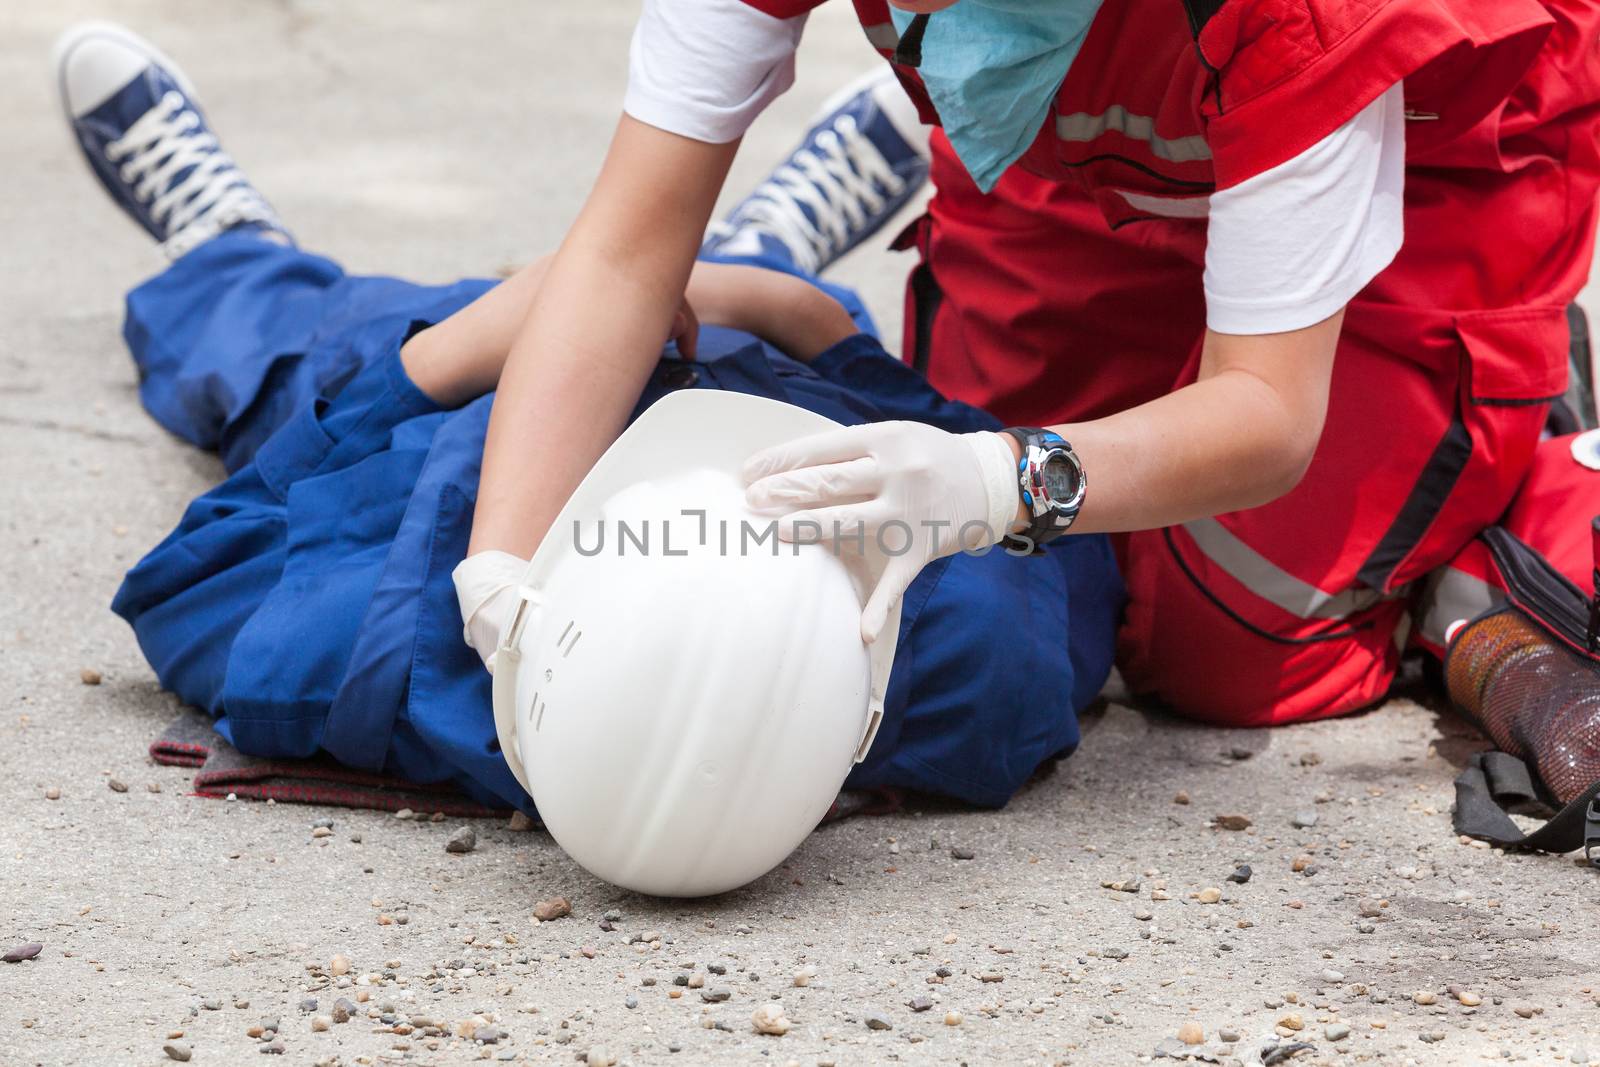 First aid after work accident by wellphoto